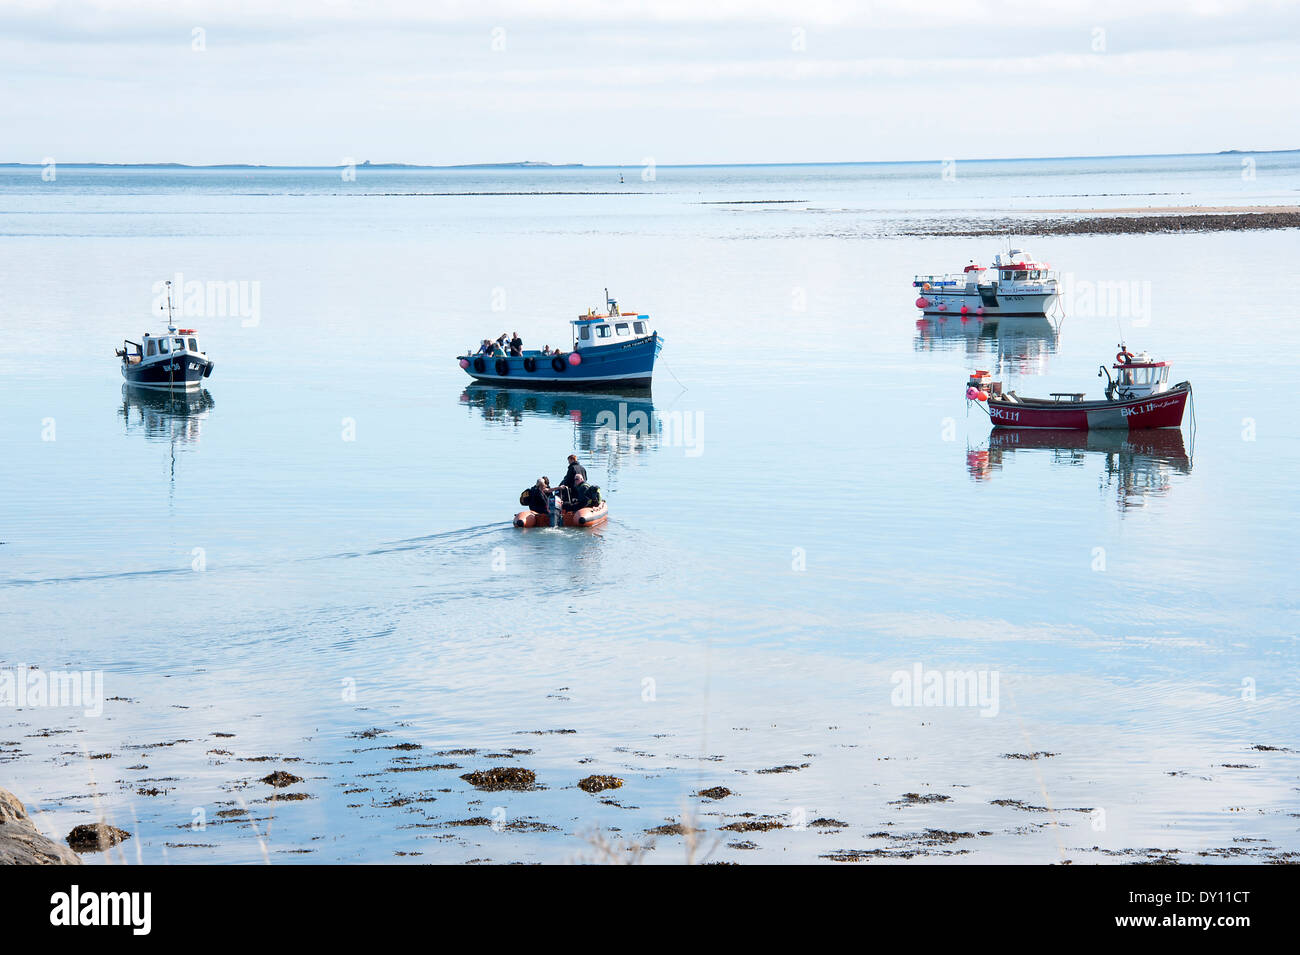 Fishing Boats Moored near Holy Island Harbour in Flat Calm Water with a Dinghy Lidisfarne Northumberland England United Kingdom Stock Photo